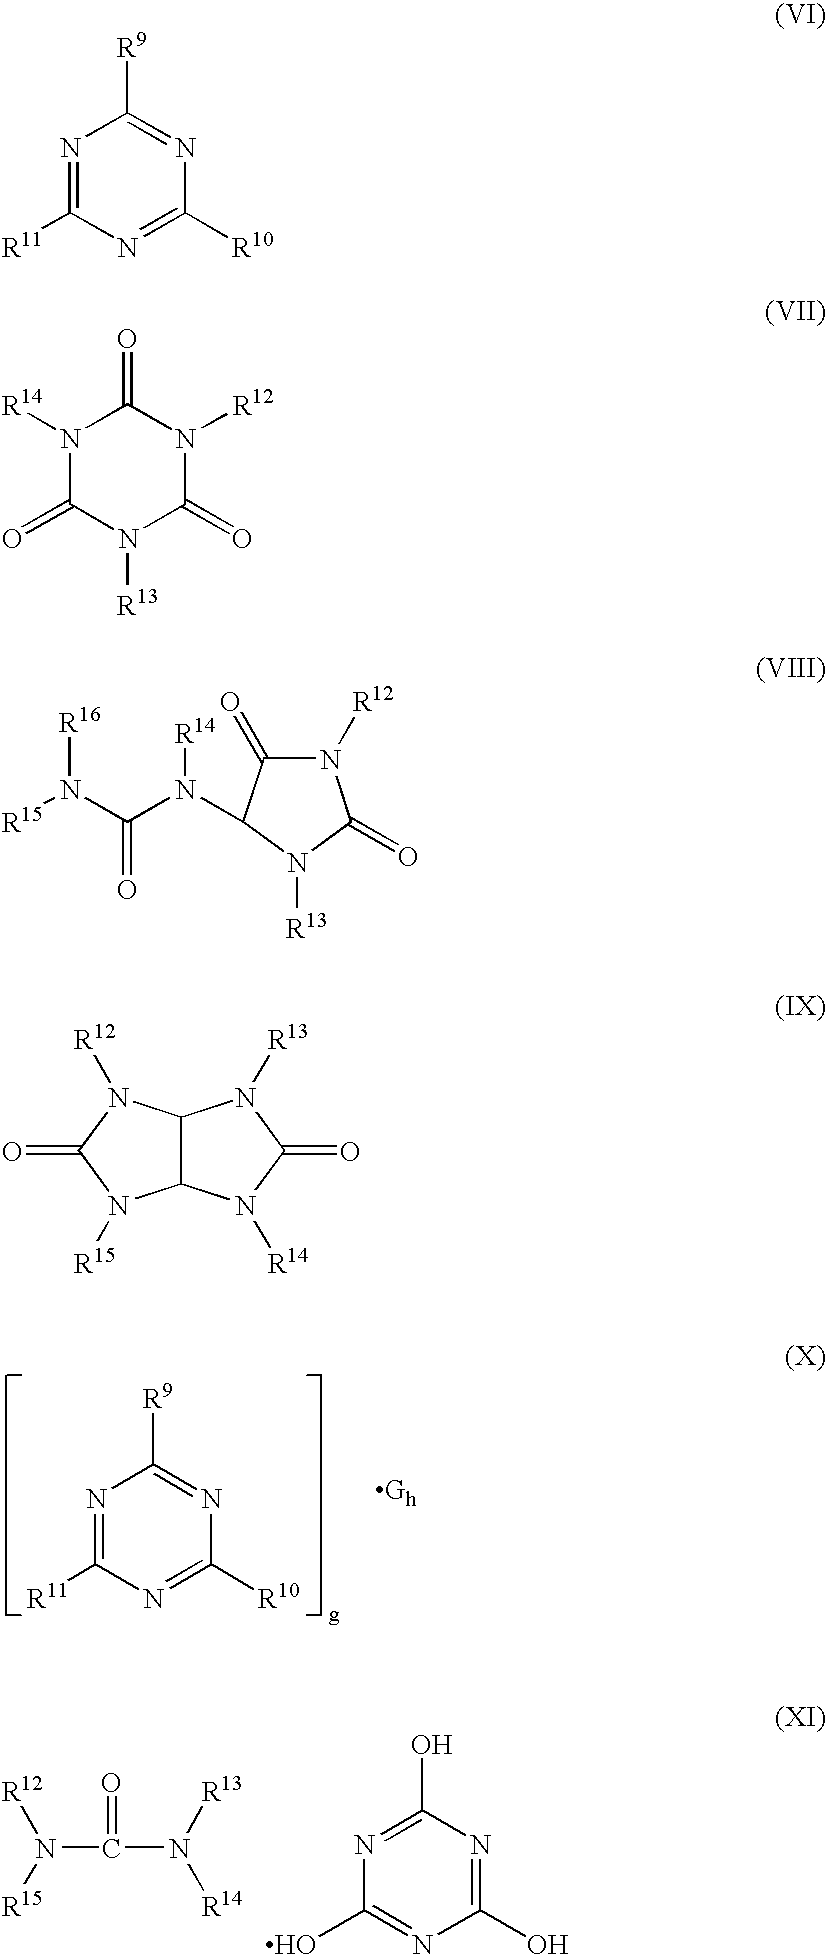 Poly(arylene ether)/polyamide composition and method of making